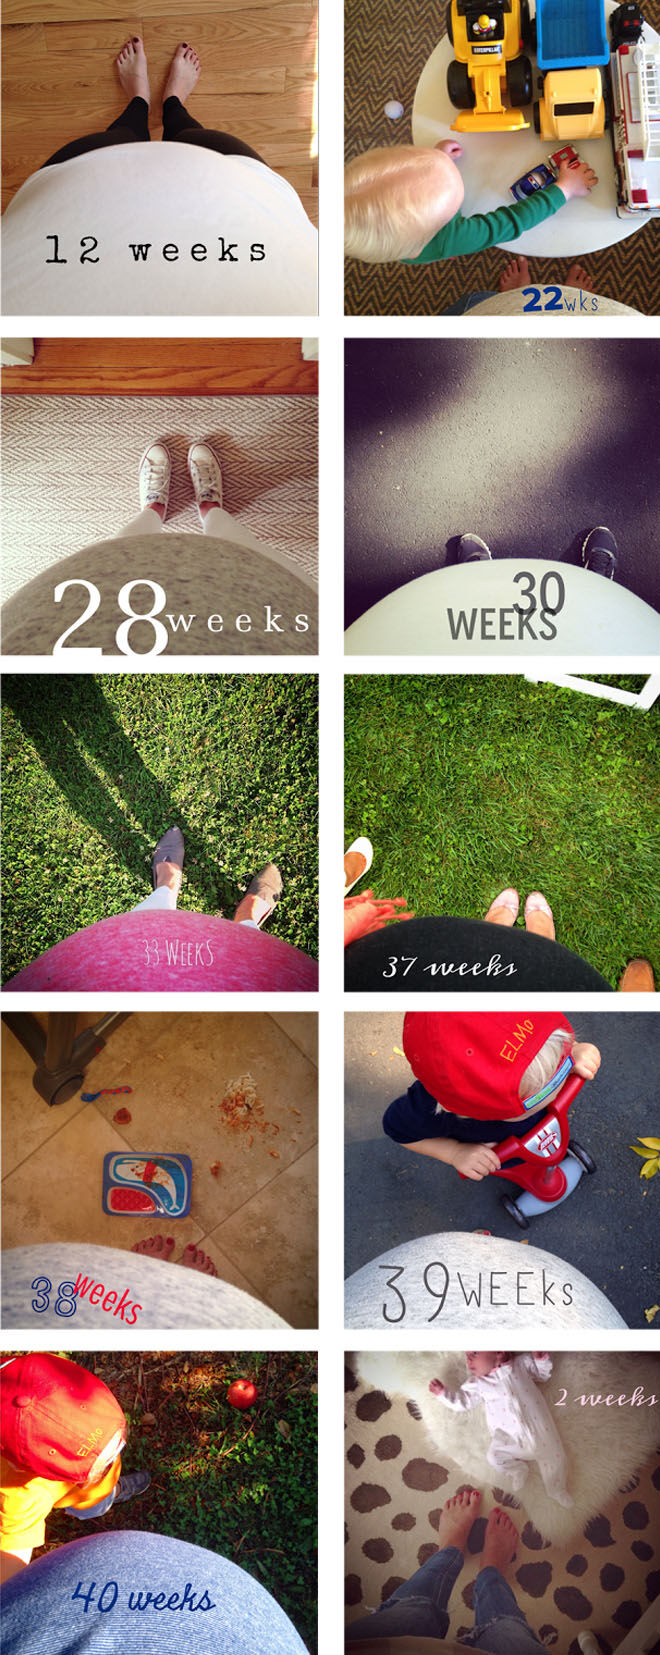 14 pregnancy week by week photo ideas: From where I stand pregnancy photos